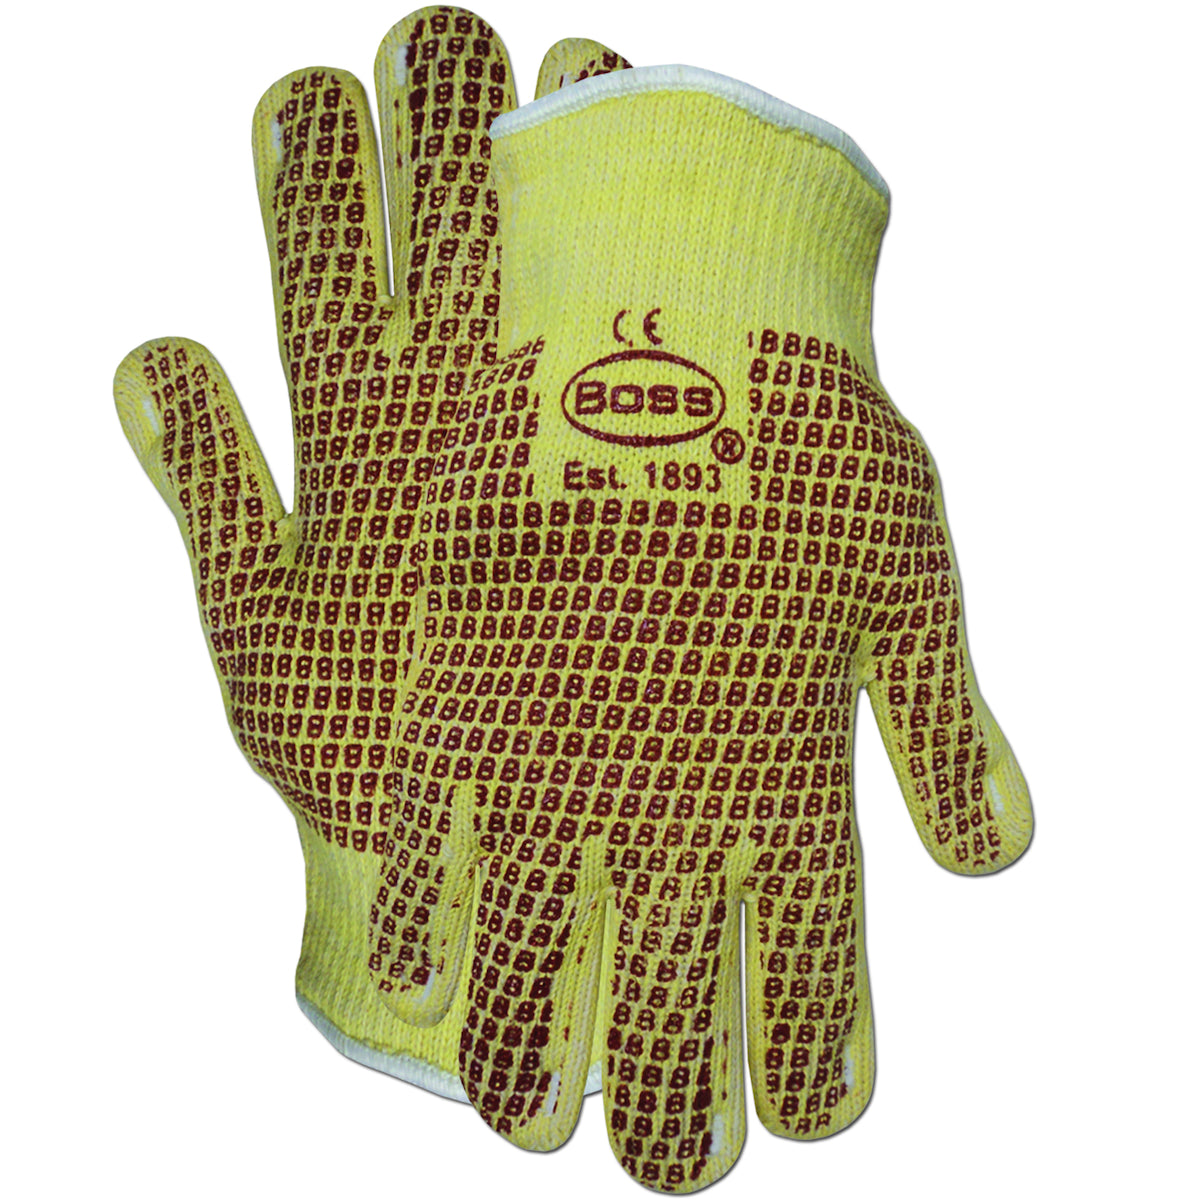 Boss 1TN4100KB Aramid / Cotton Seamless Knit Hot Mill Glove with Cotton Liner and Double-Sided Nitrile Coating - Knitwrist